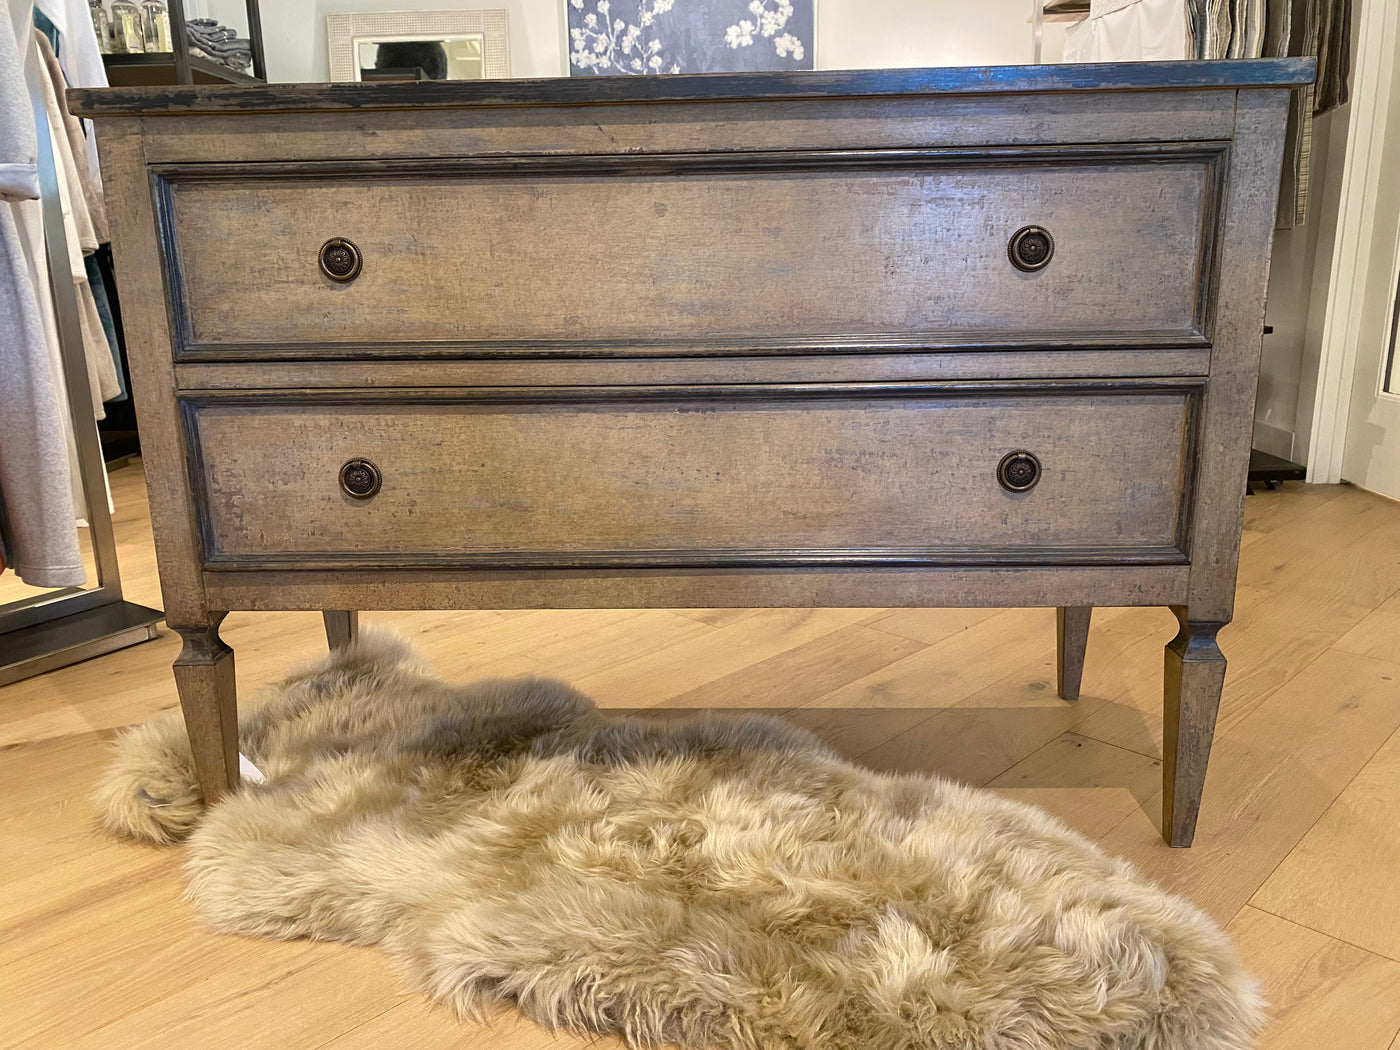 CHEST 2-DRAWER TUSCAN